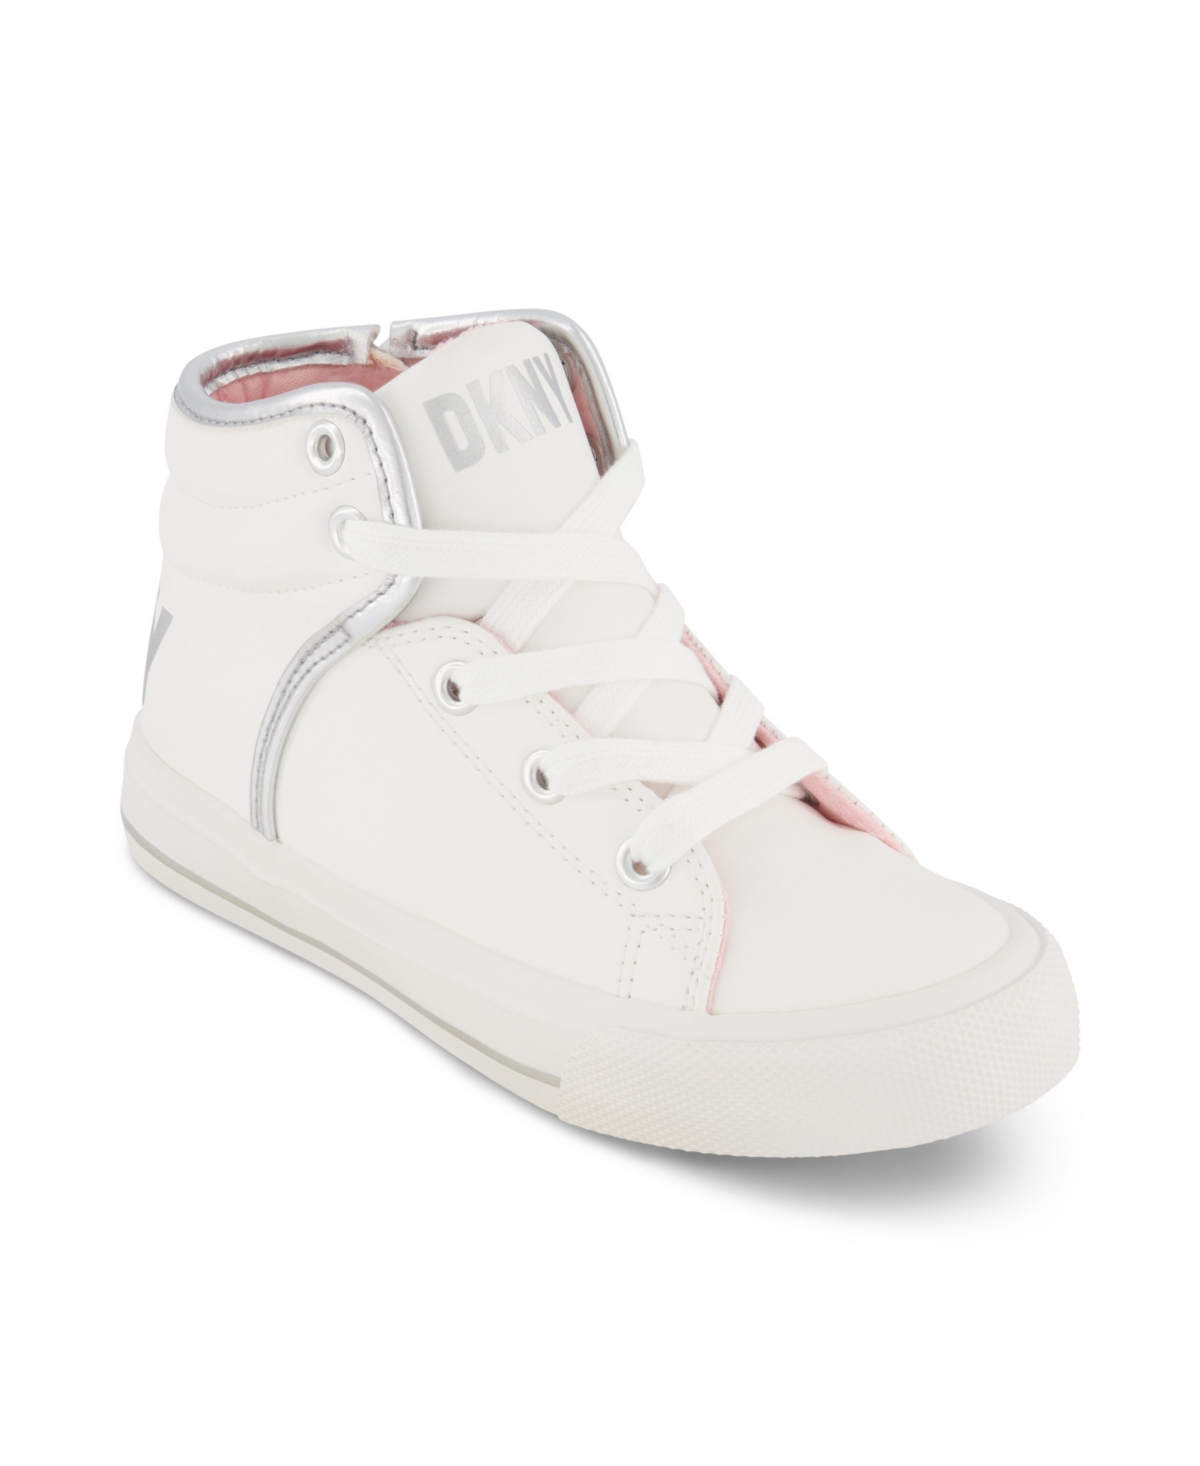 Shop Dkny Little Girls Fashion Athletic High Top Sneakers In White